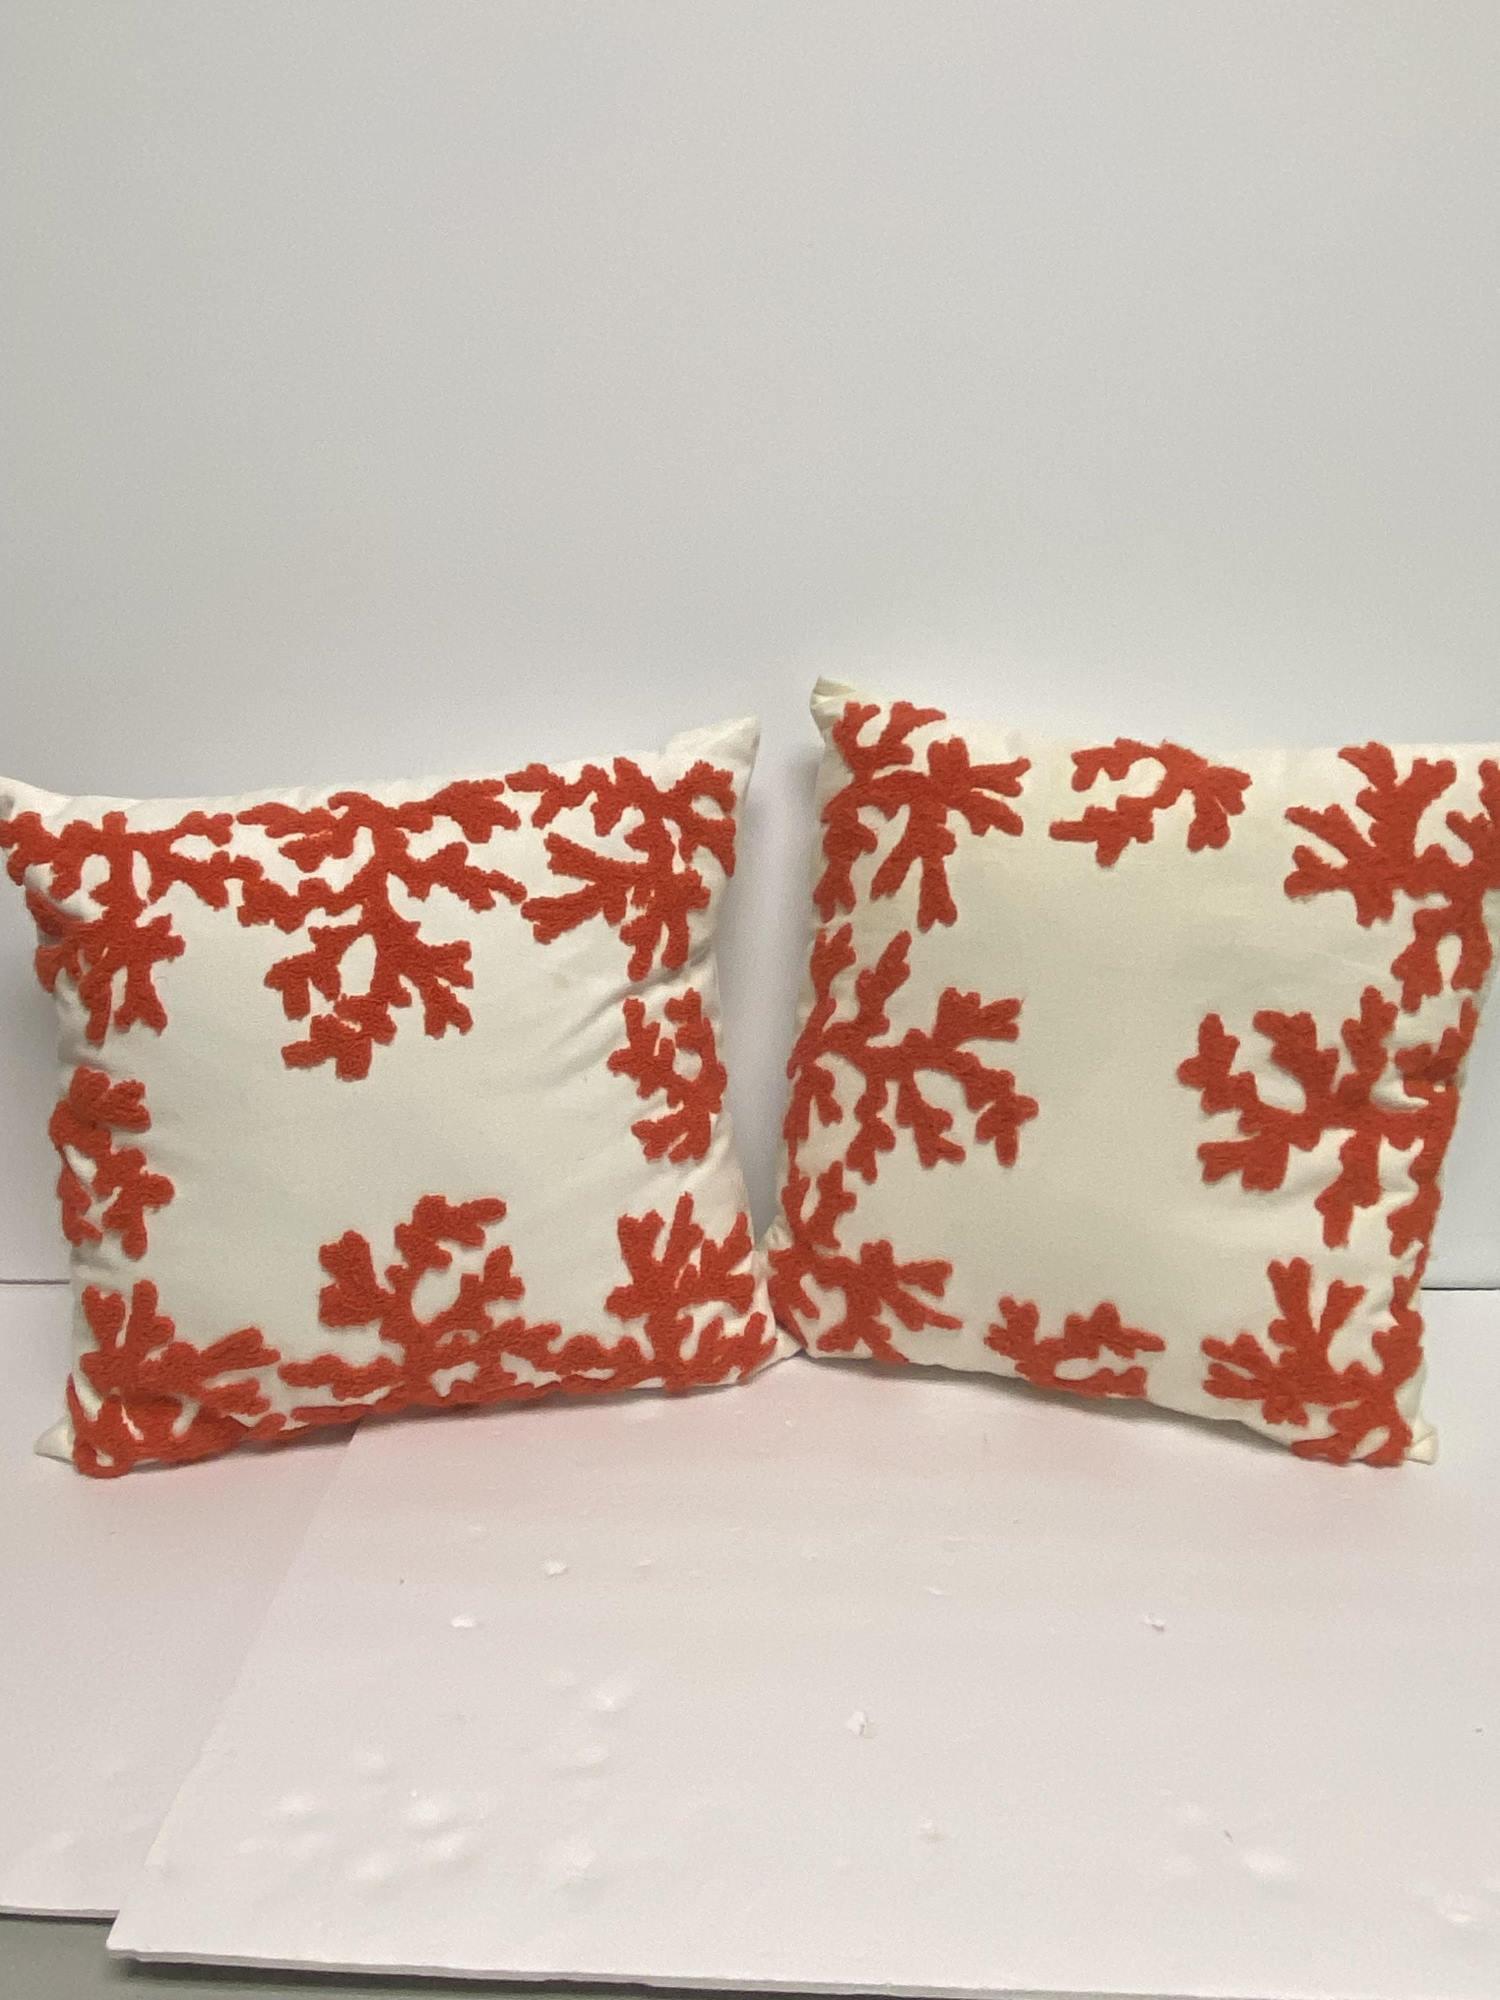 PAIR OF RED CORAL STYLED PILLOWS